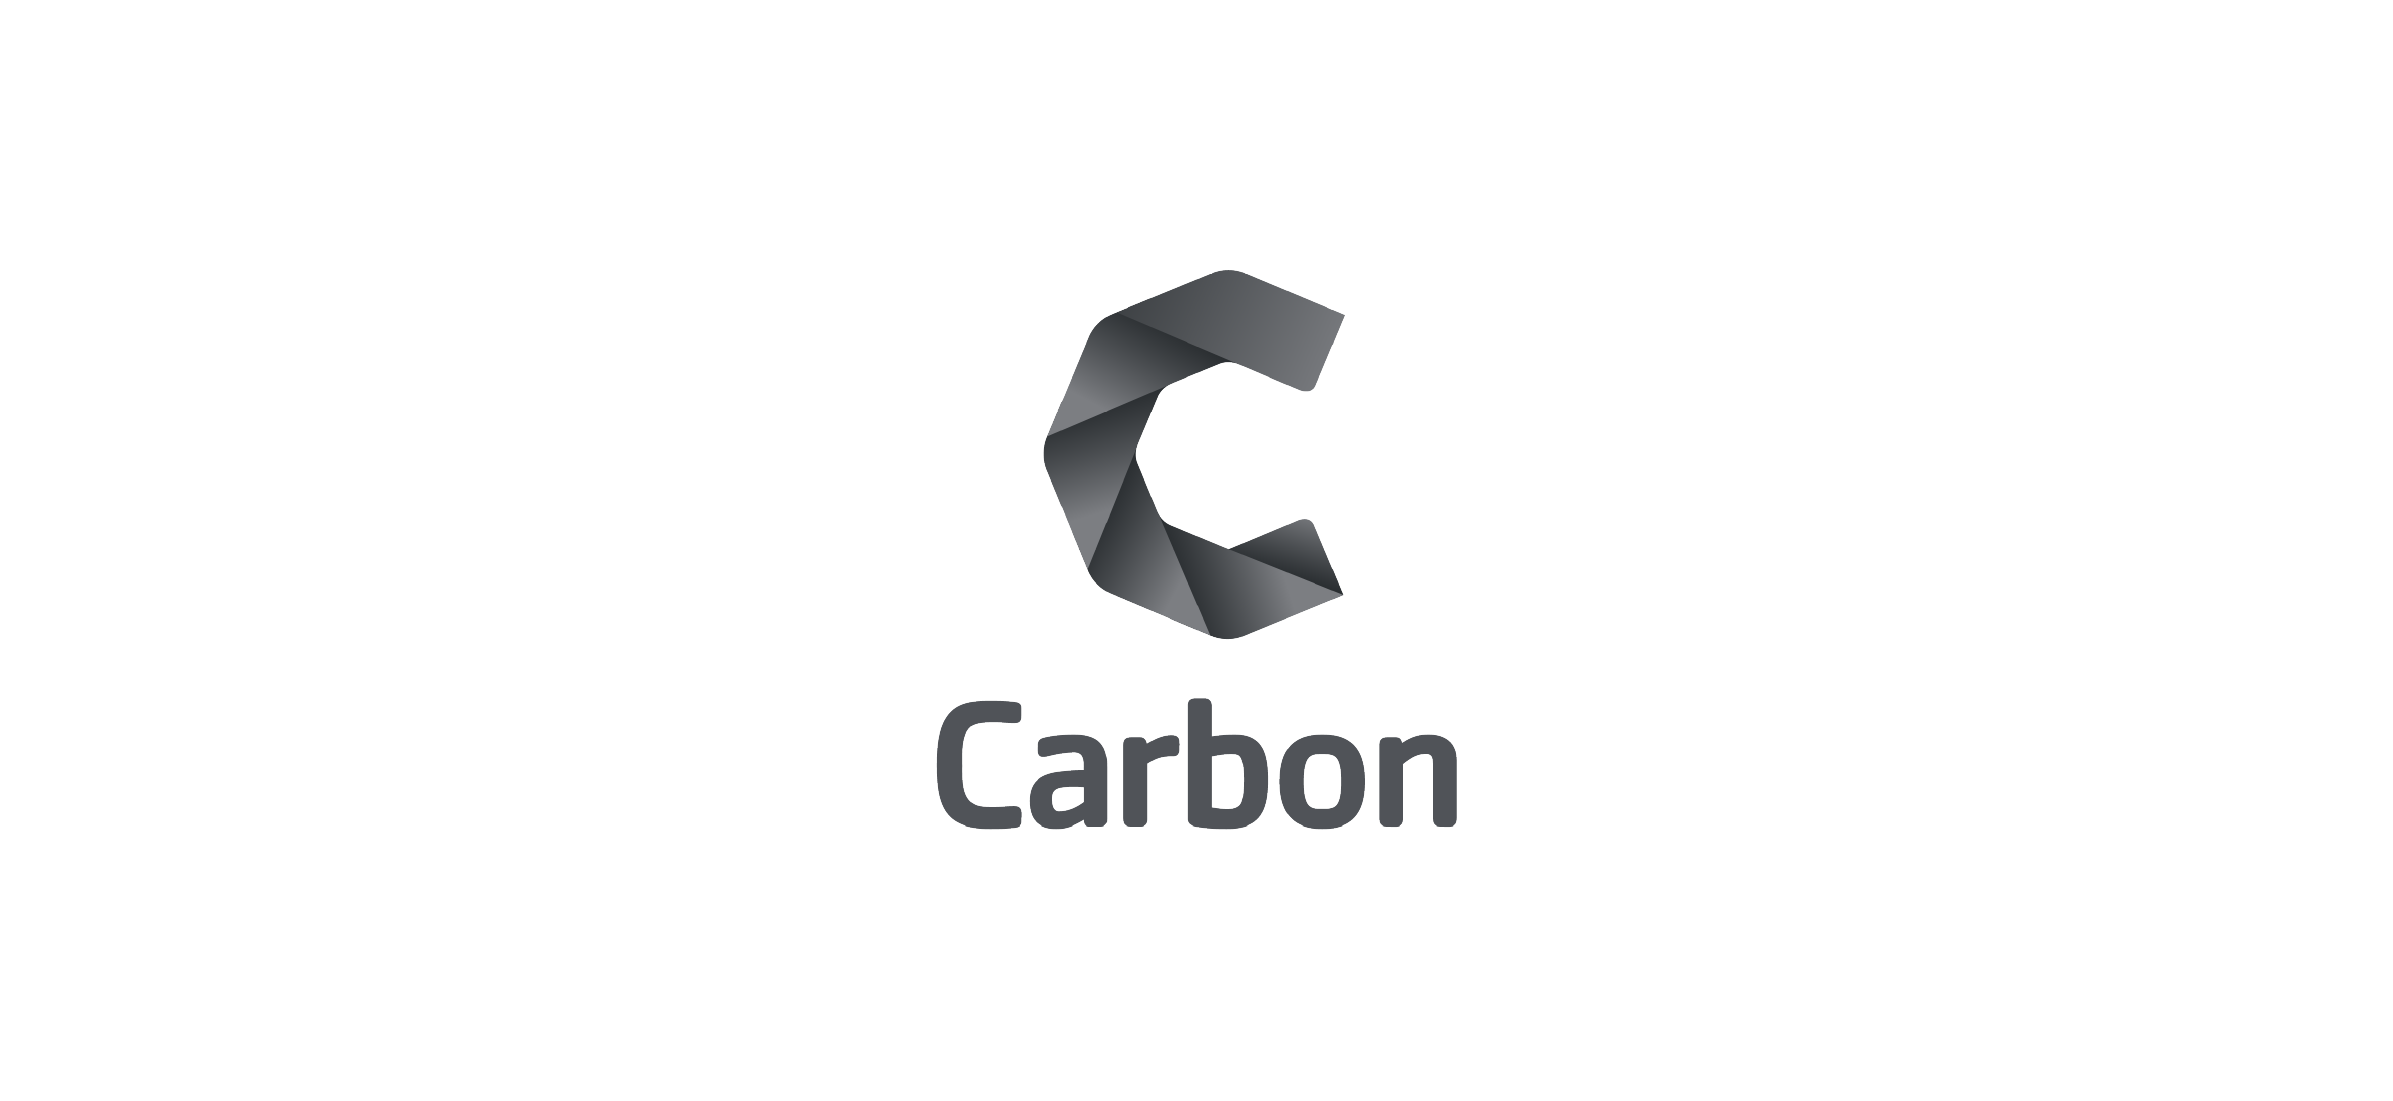 The Carbon Group logo